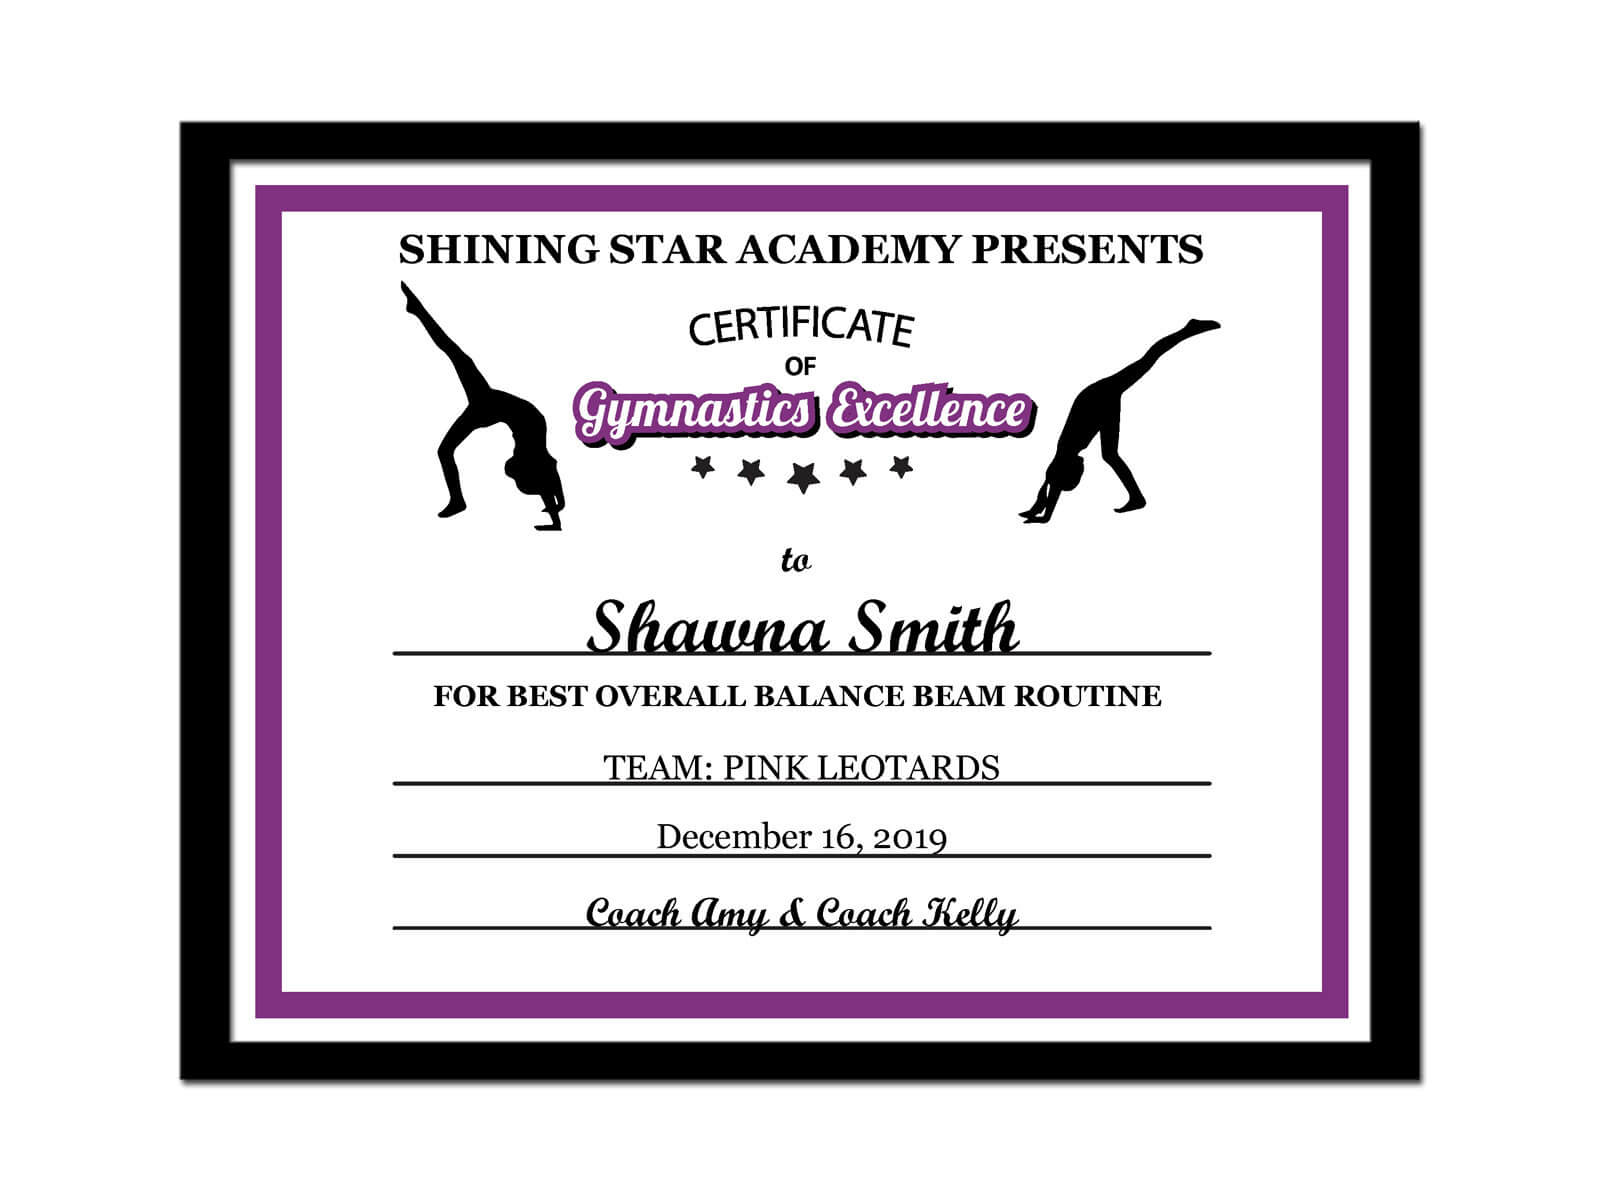 Editable Pdf Sports Team Gymnastics Certificate Award Template In 10 Colors  Letter Size Instant Download Pdf & Blank Jpg Sc 002 Gymnastics With Regard To Gymnastics Certificate Template